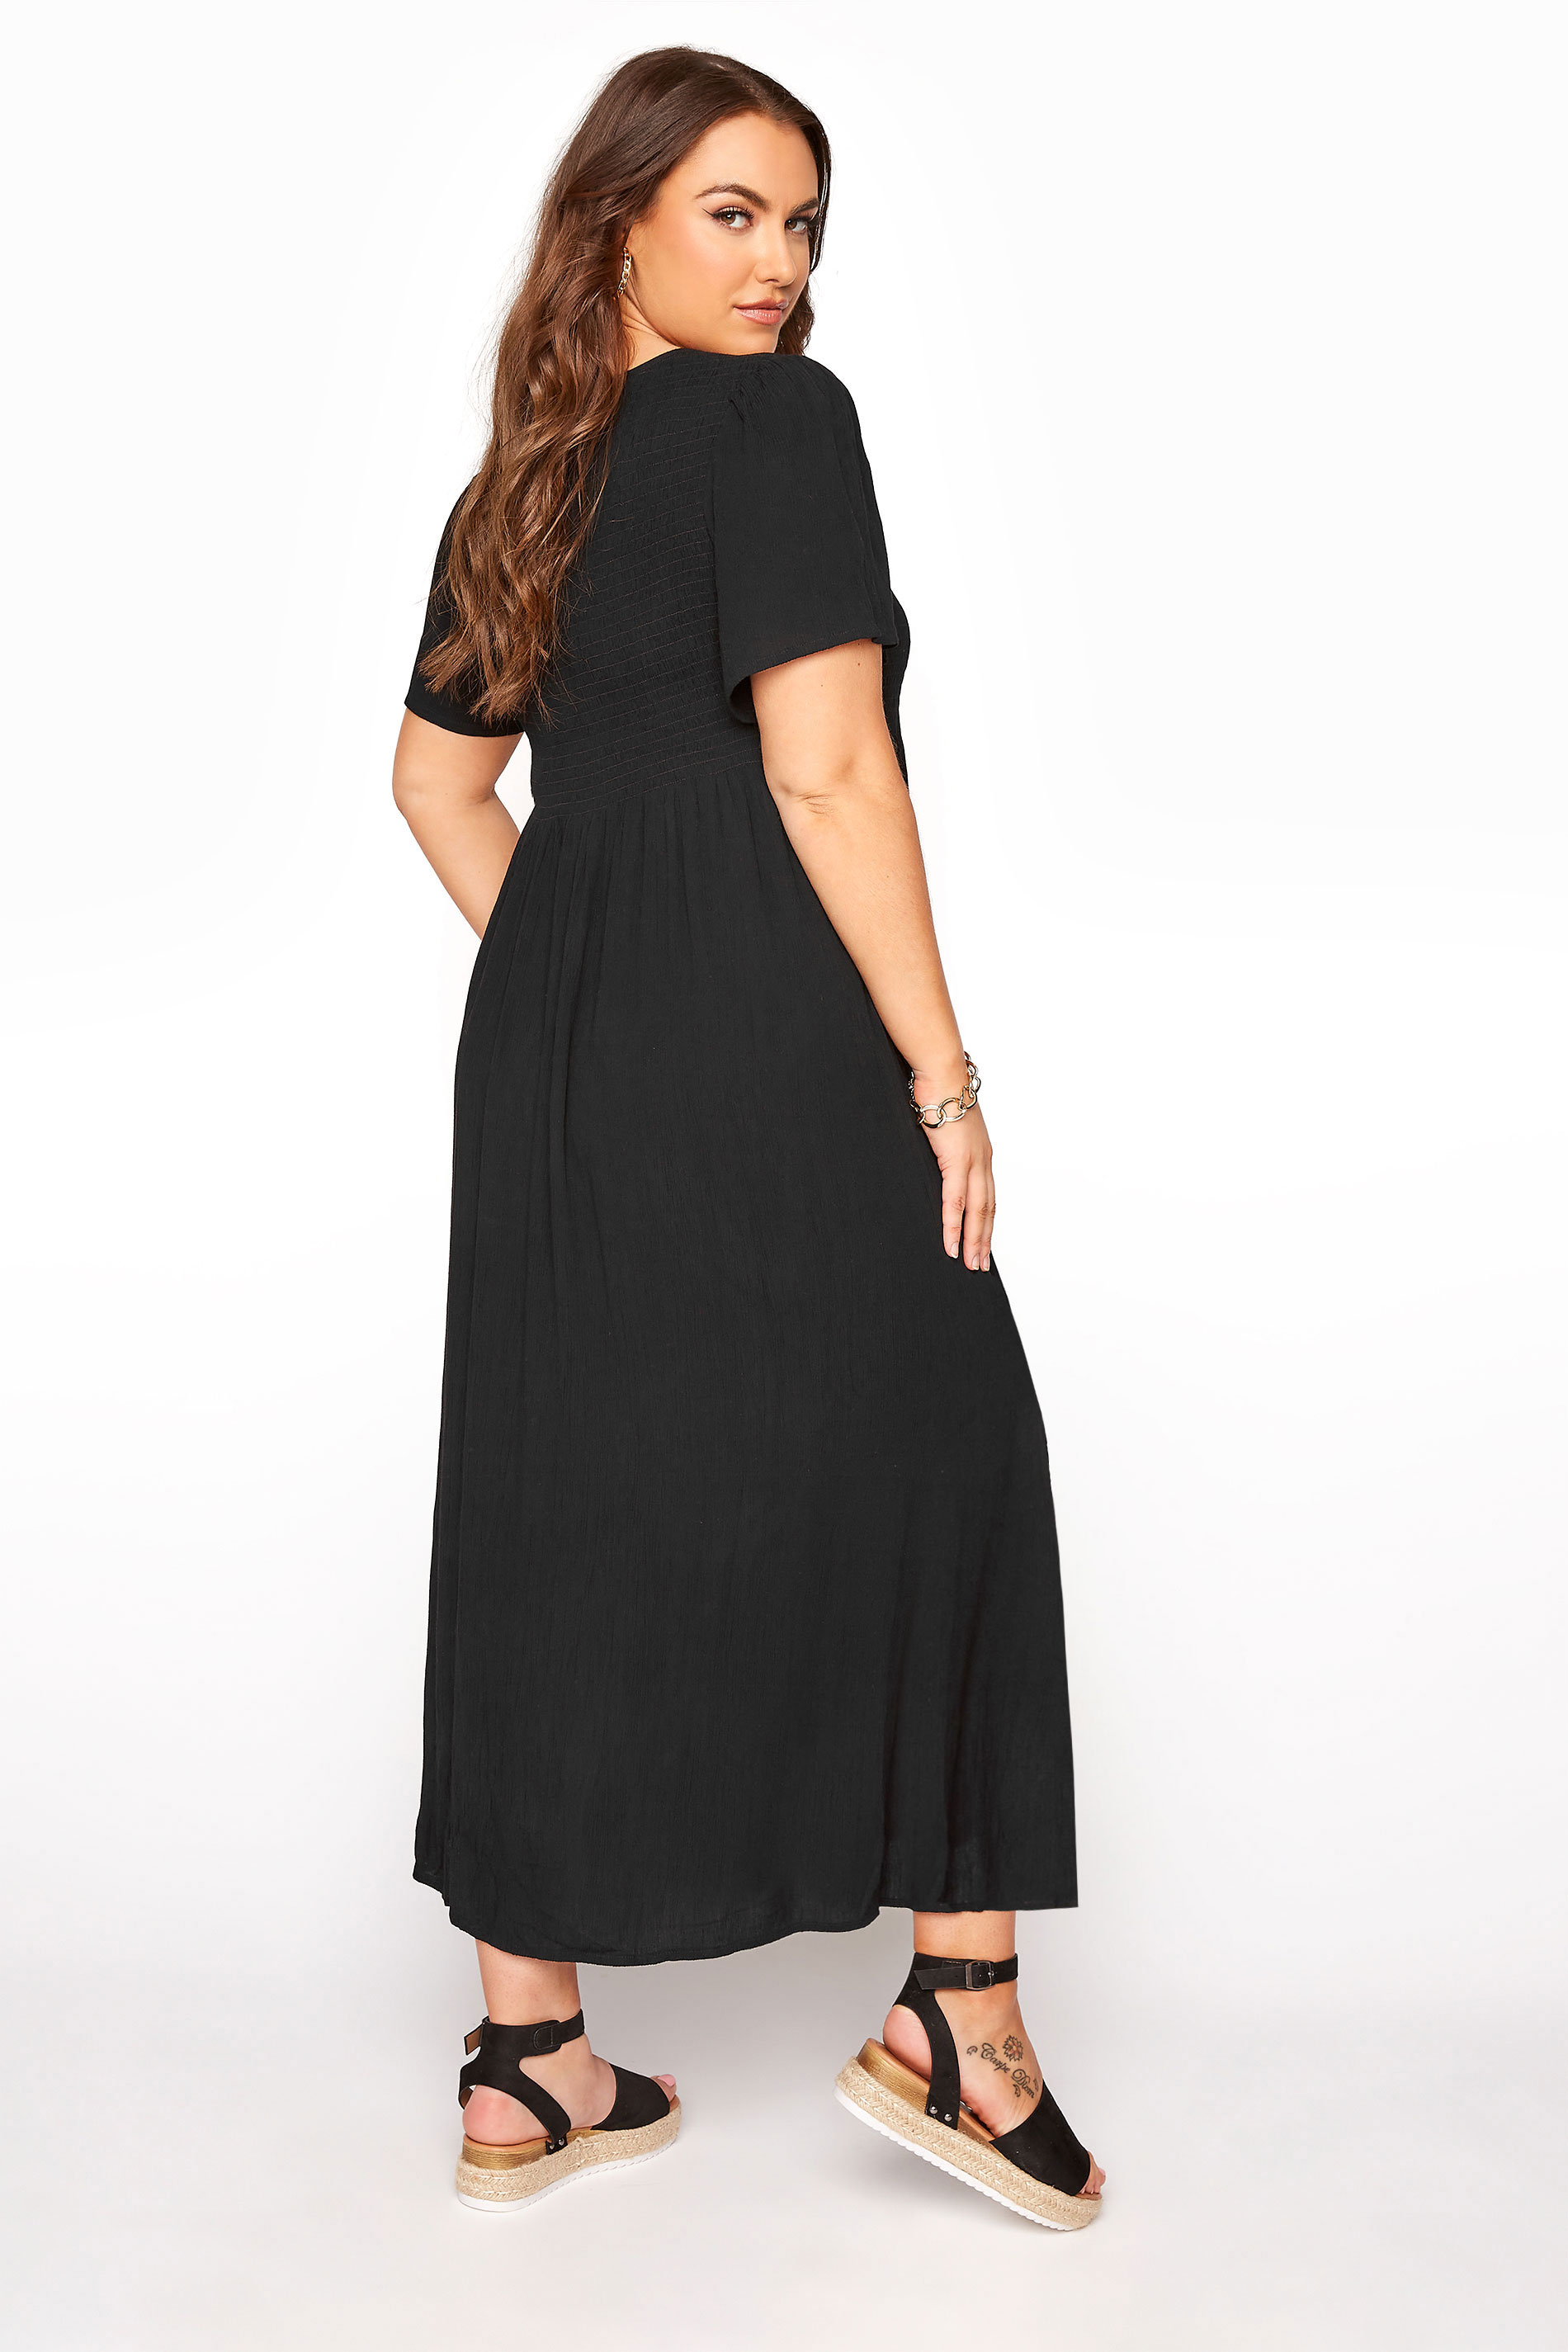 LIMITED COLLECTION Black Shirred Crinkle Maxi Dress | Yours Clothing